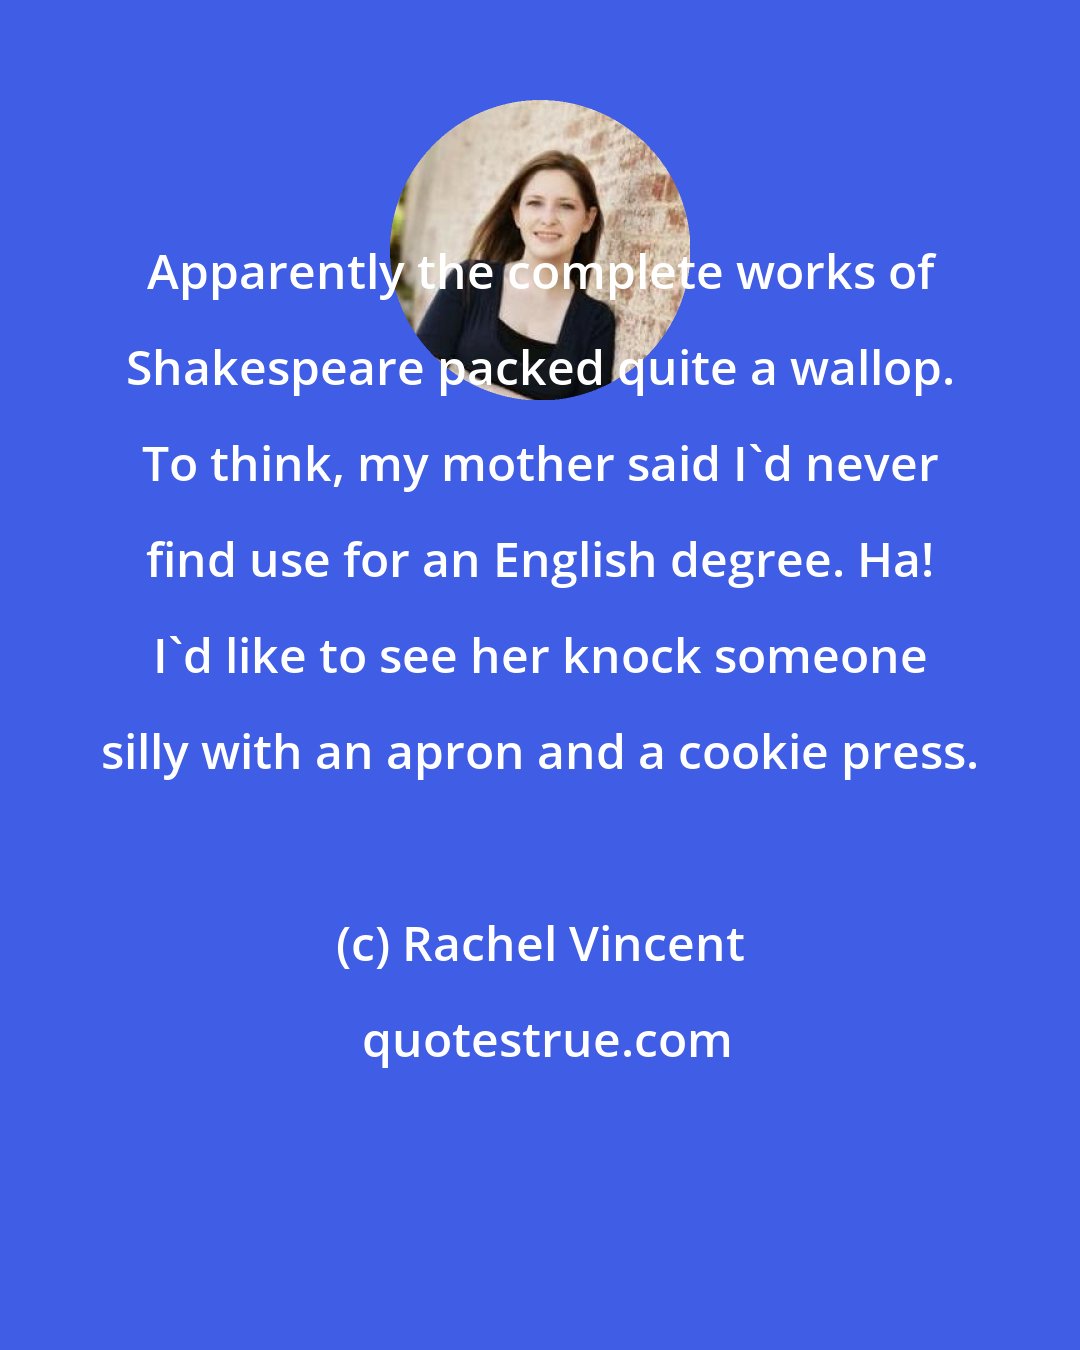 Rachel Vincent: Apparently the complete works of Shakespeare packed quite a wallop. To think, my mother said I'd never find use for an English degree. Ha! I'd like to see her knock someone silly with an apron and a cookie press.